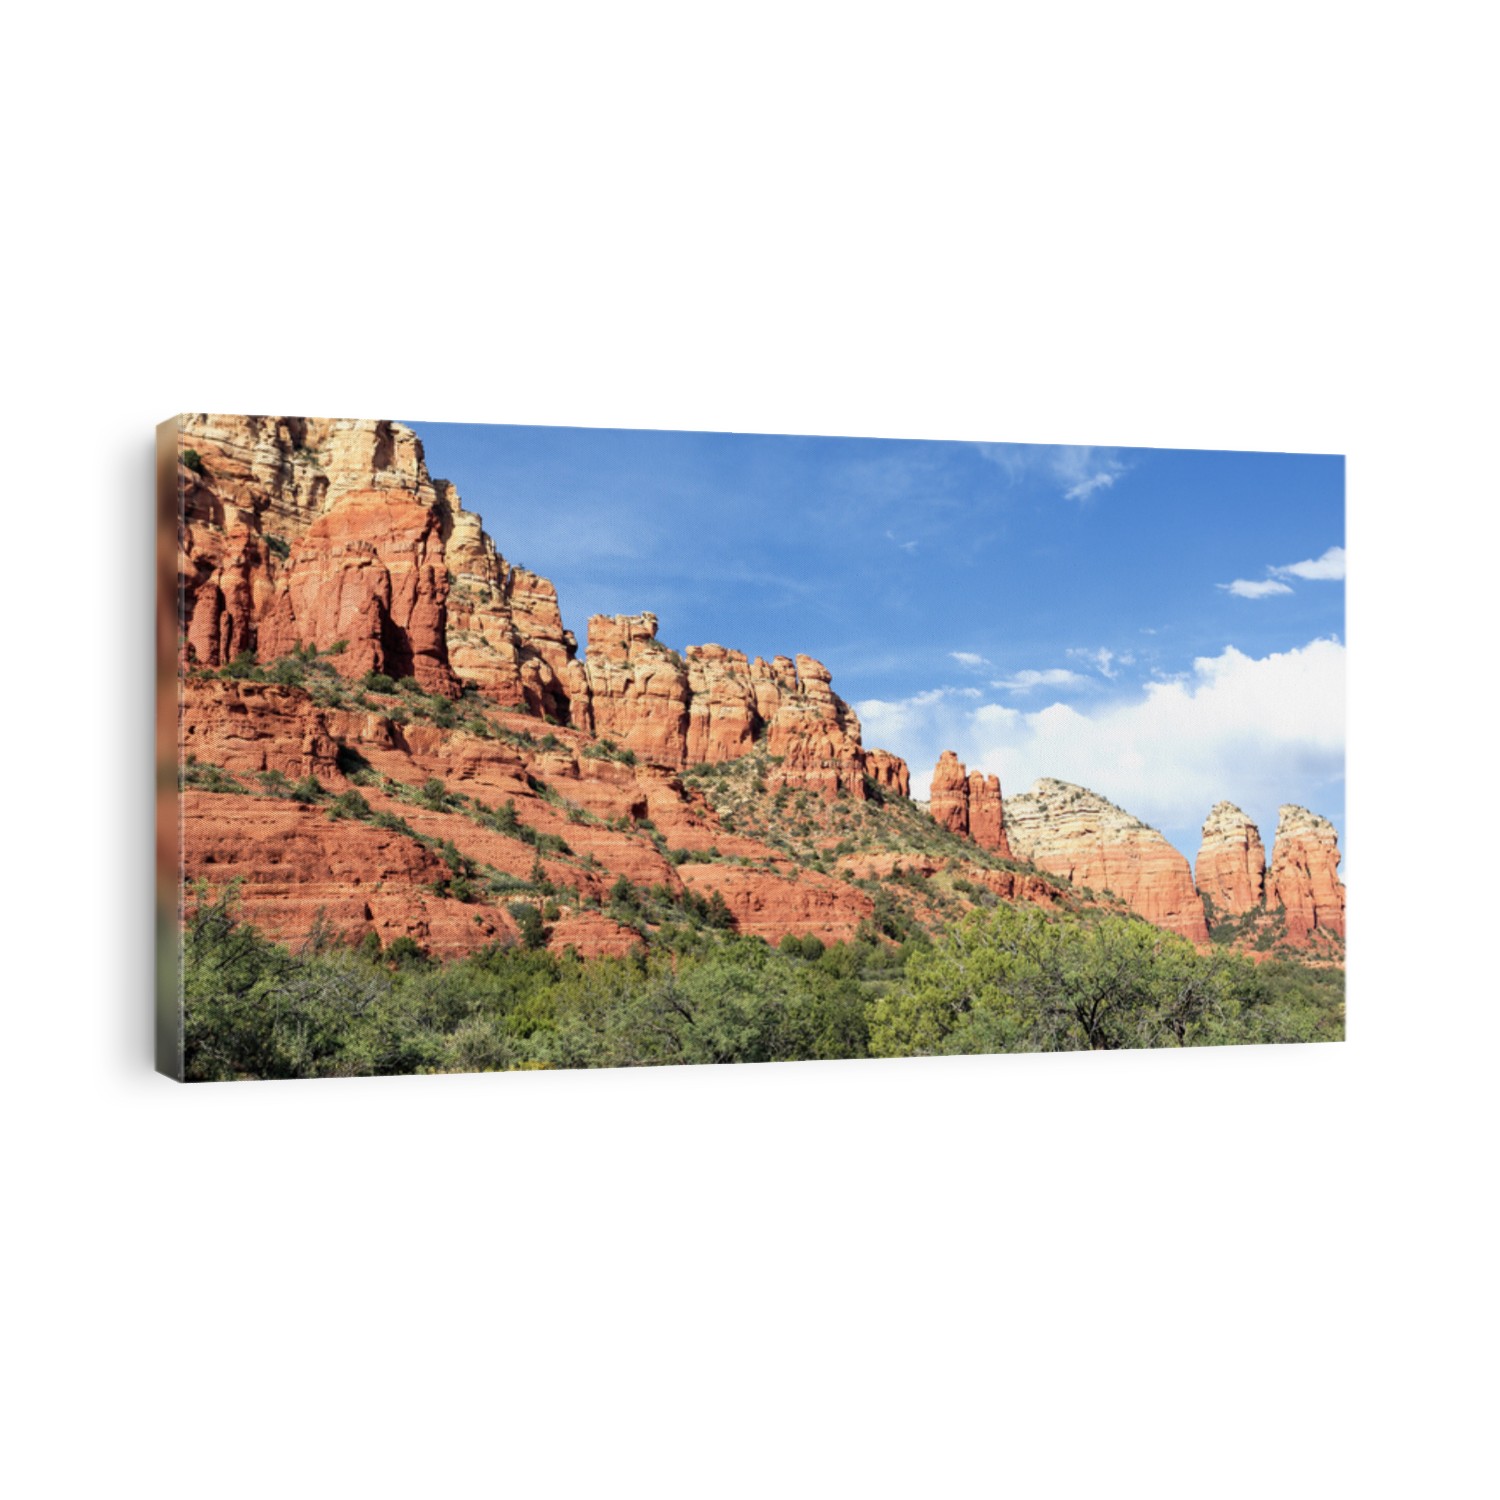 panoramic view of famous wilderness landscape near Sedona